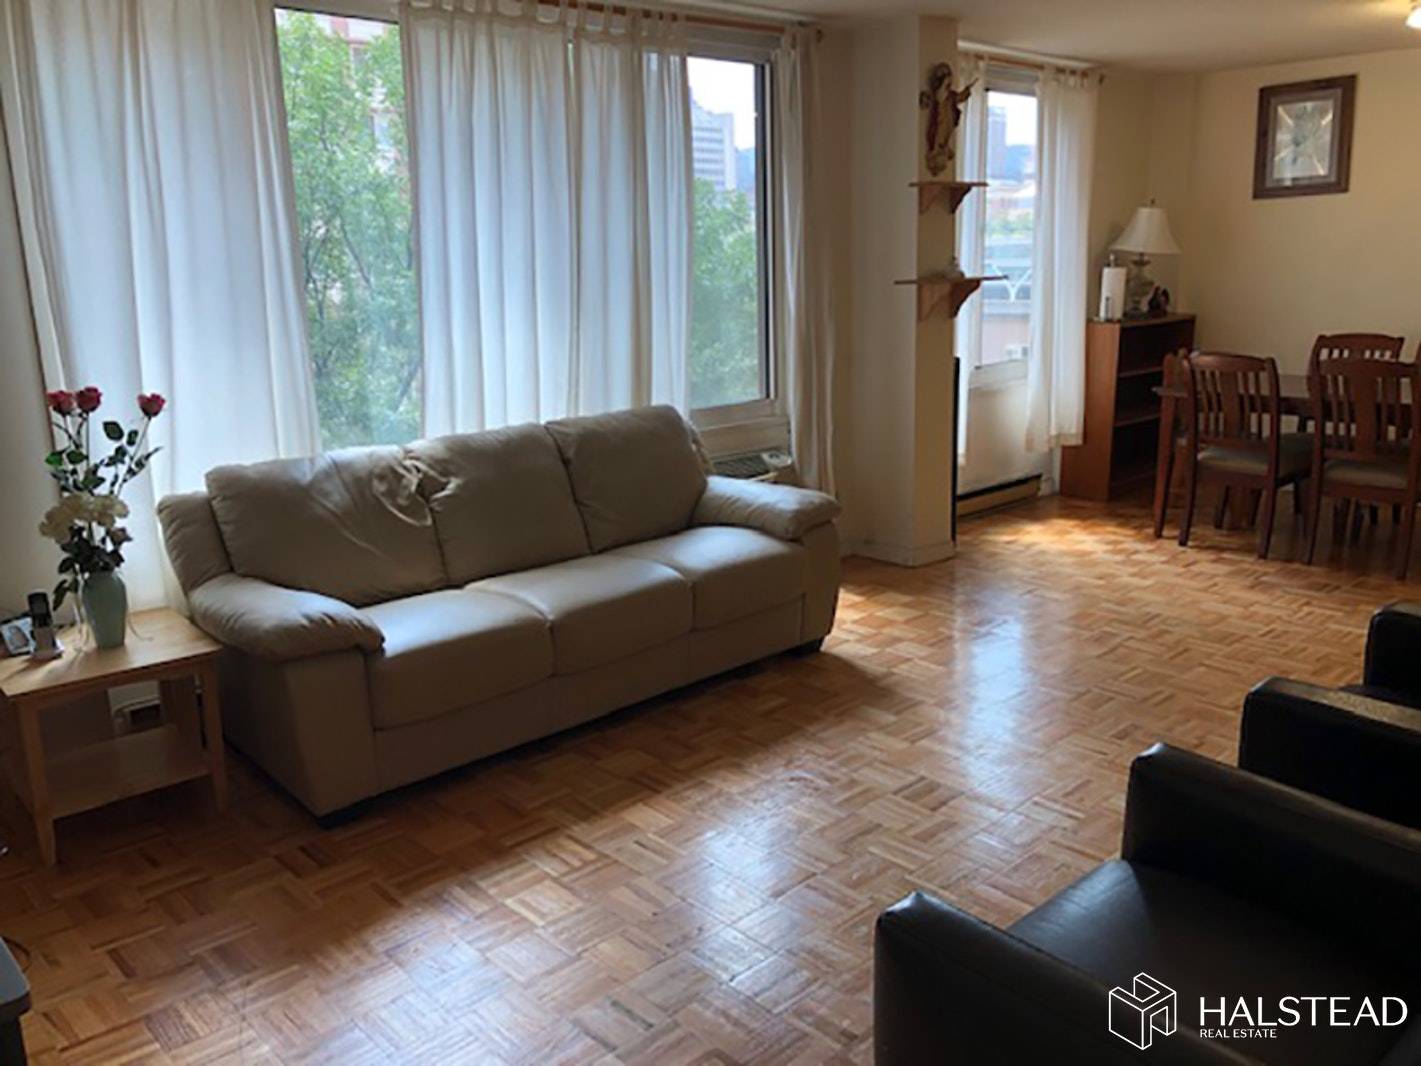 Unit 501 is a spacious 1 bedroom, 1 bathroom home approximately 803 SF.